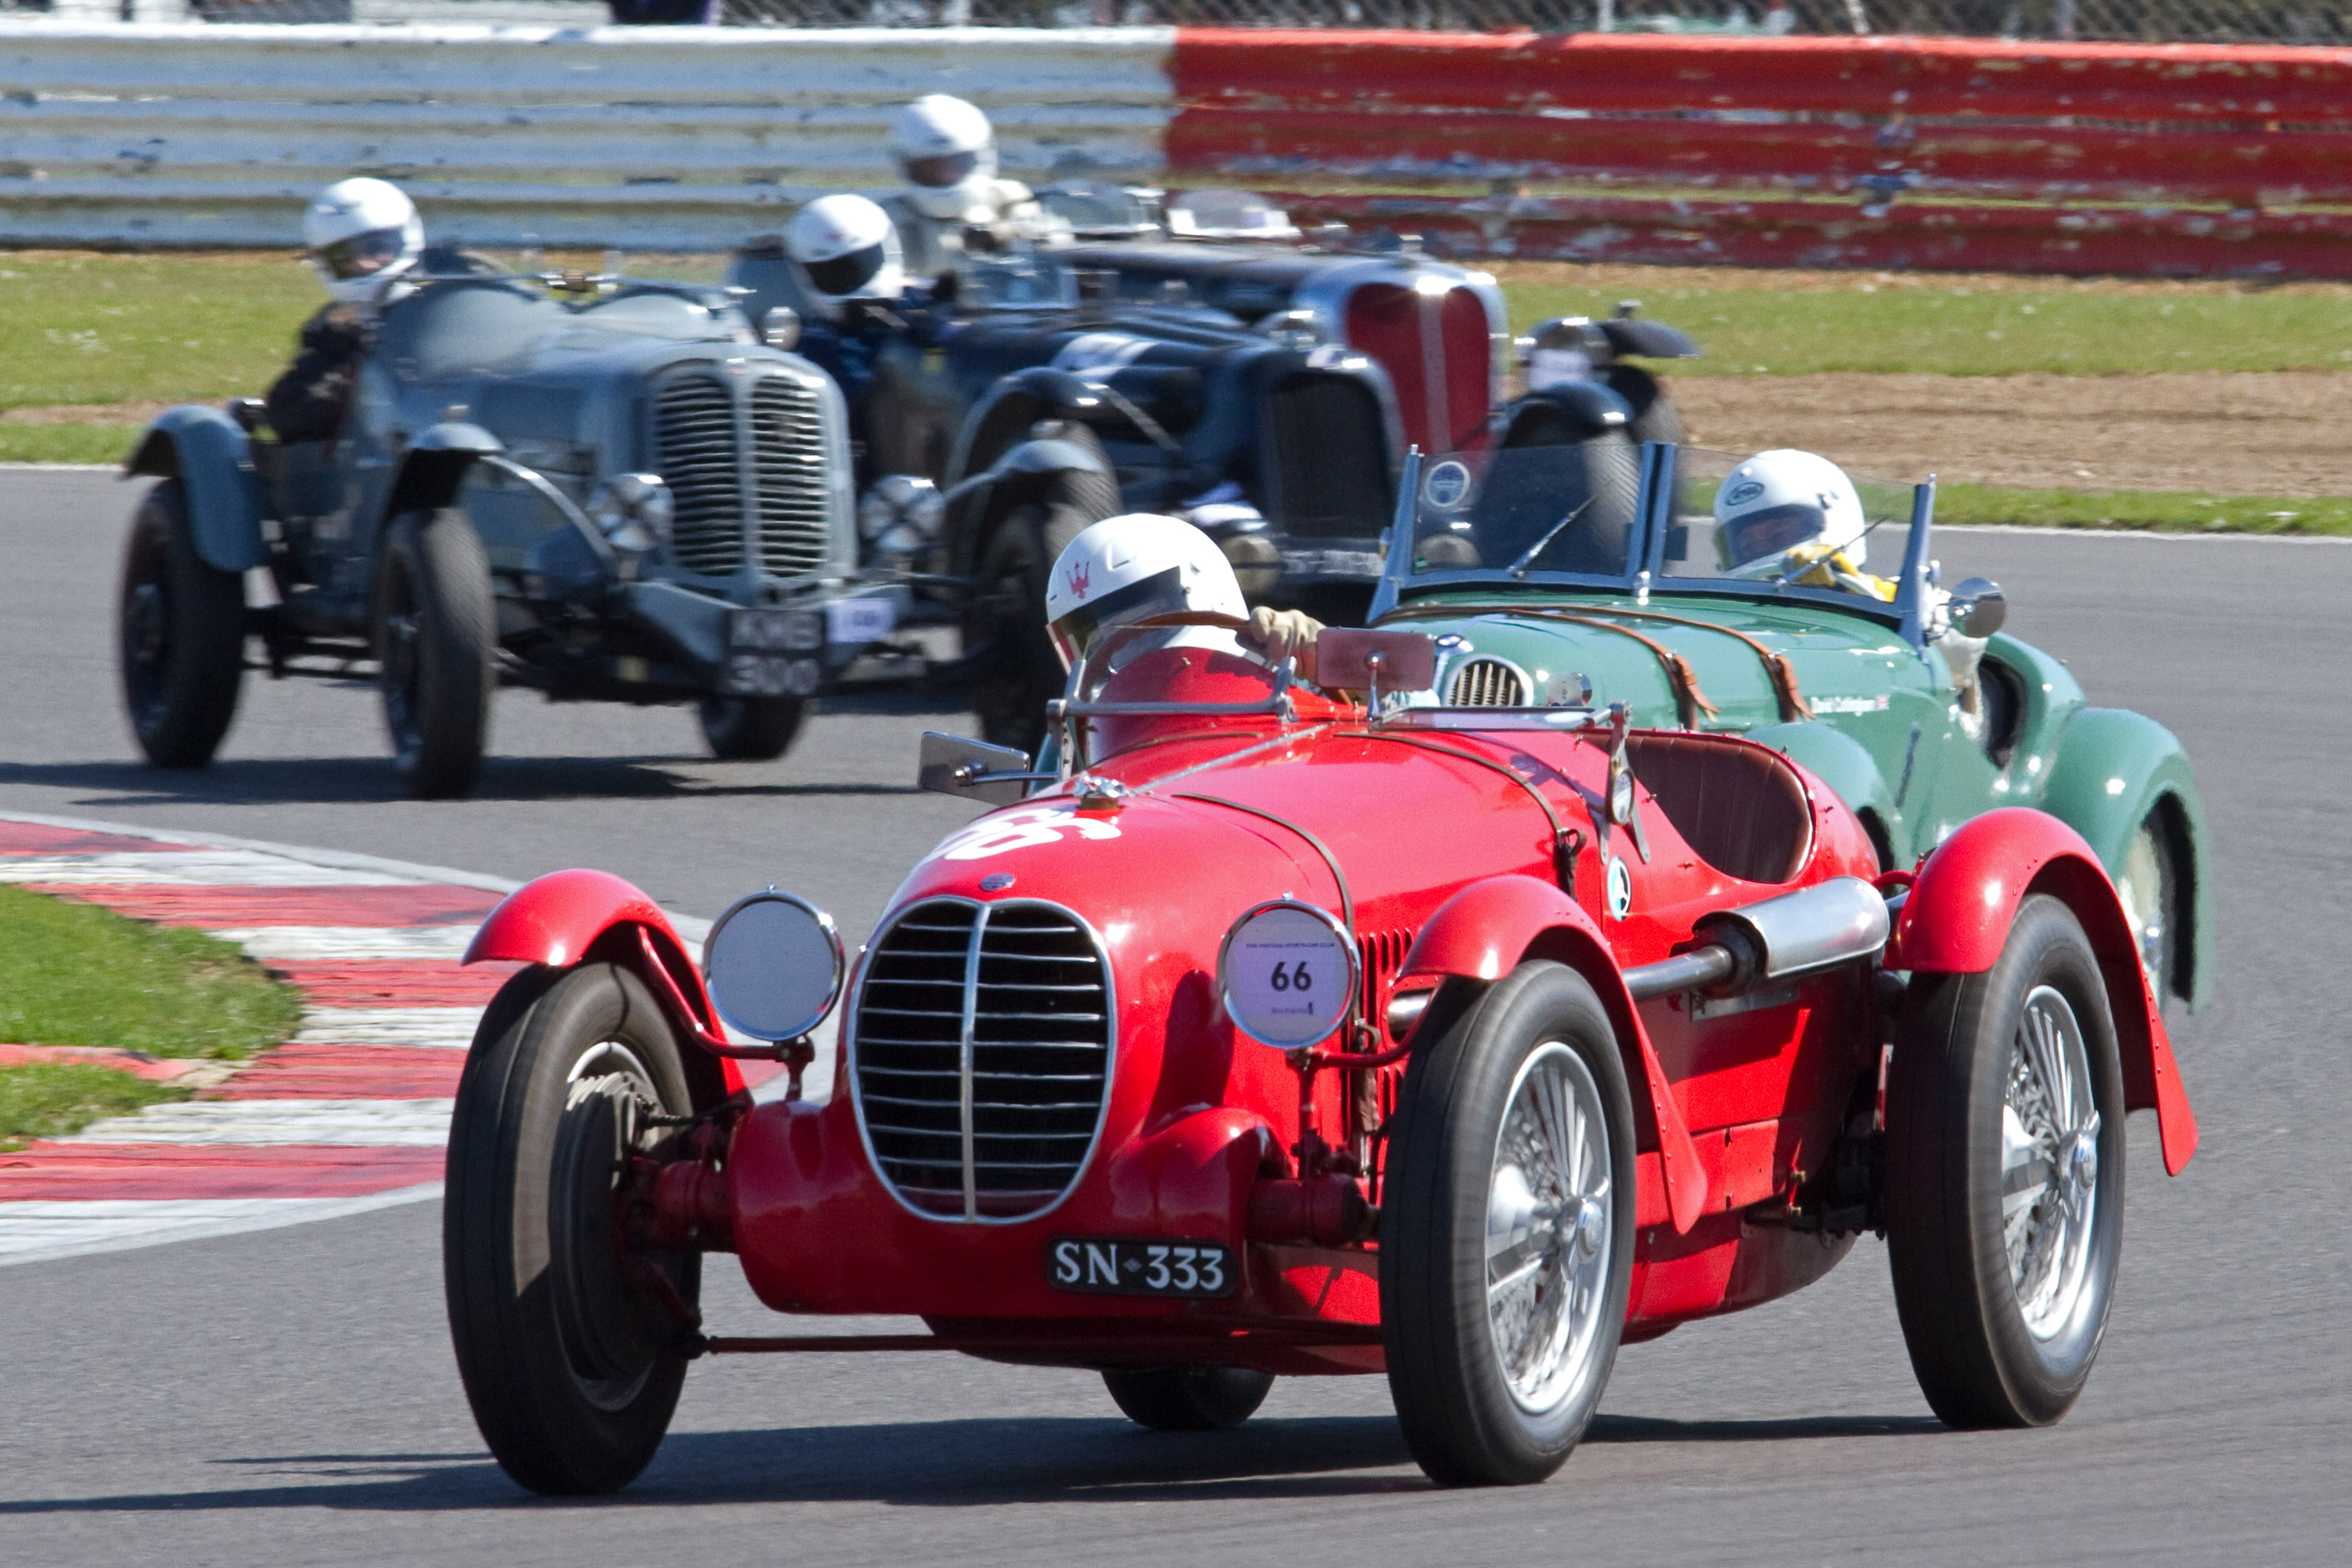 Calling all VSCC Racers – there is now less than a week to enter Silverstone ‘Spring Start’ cover